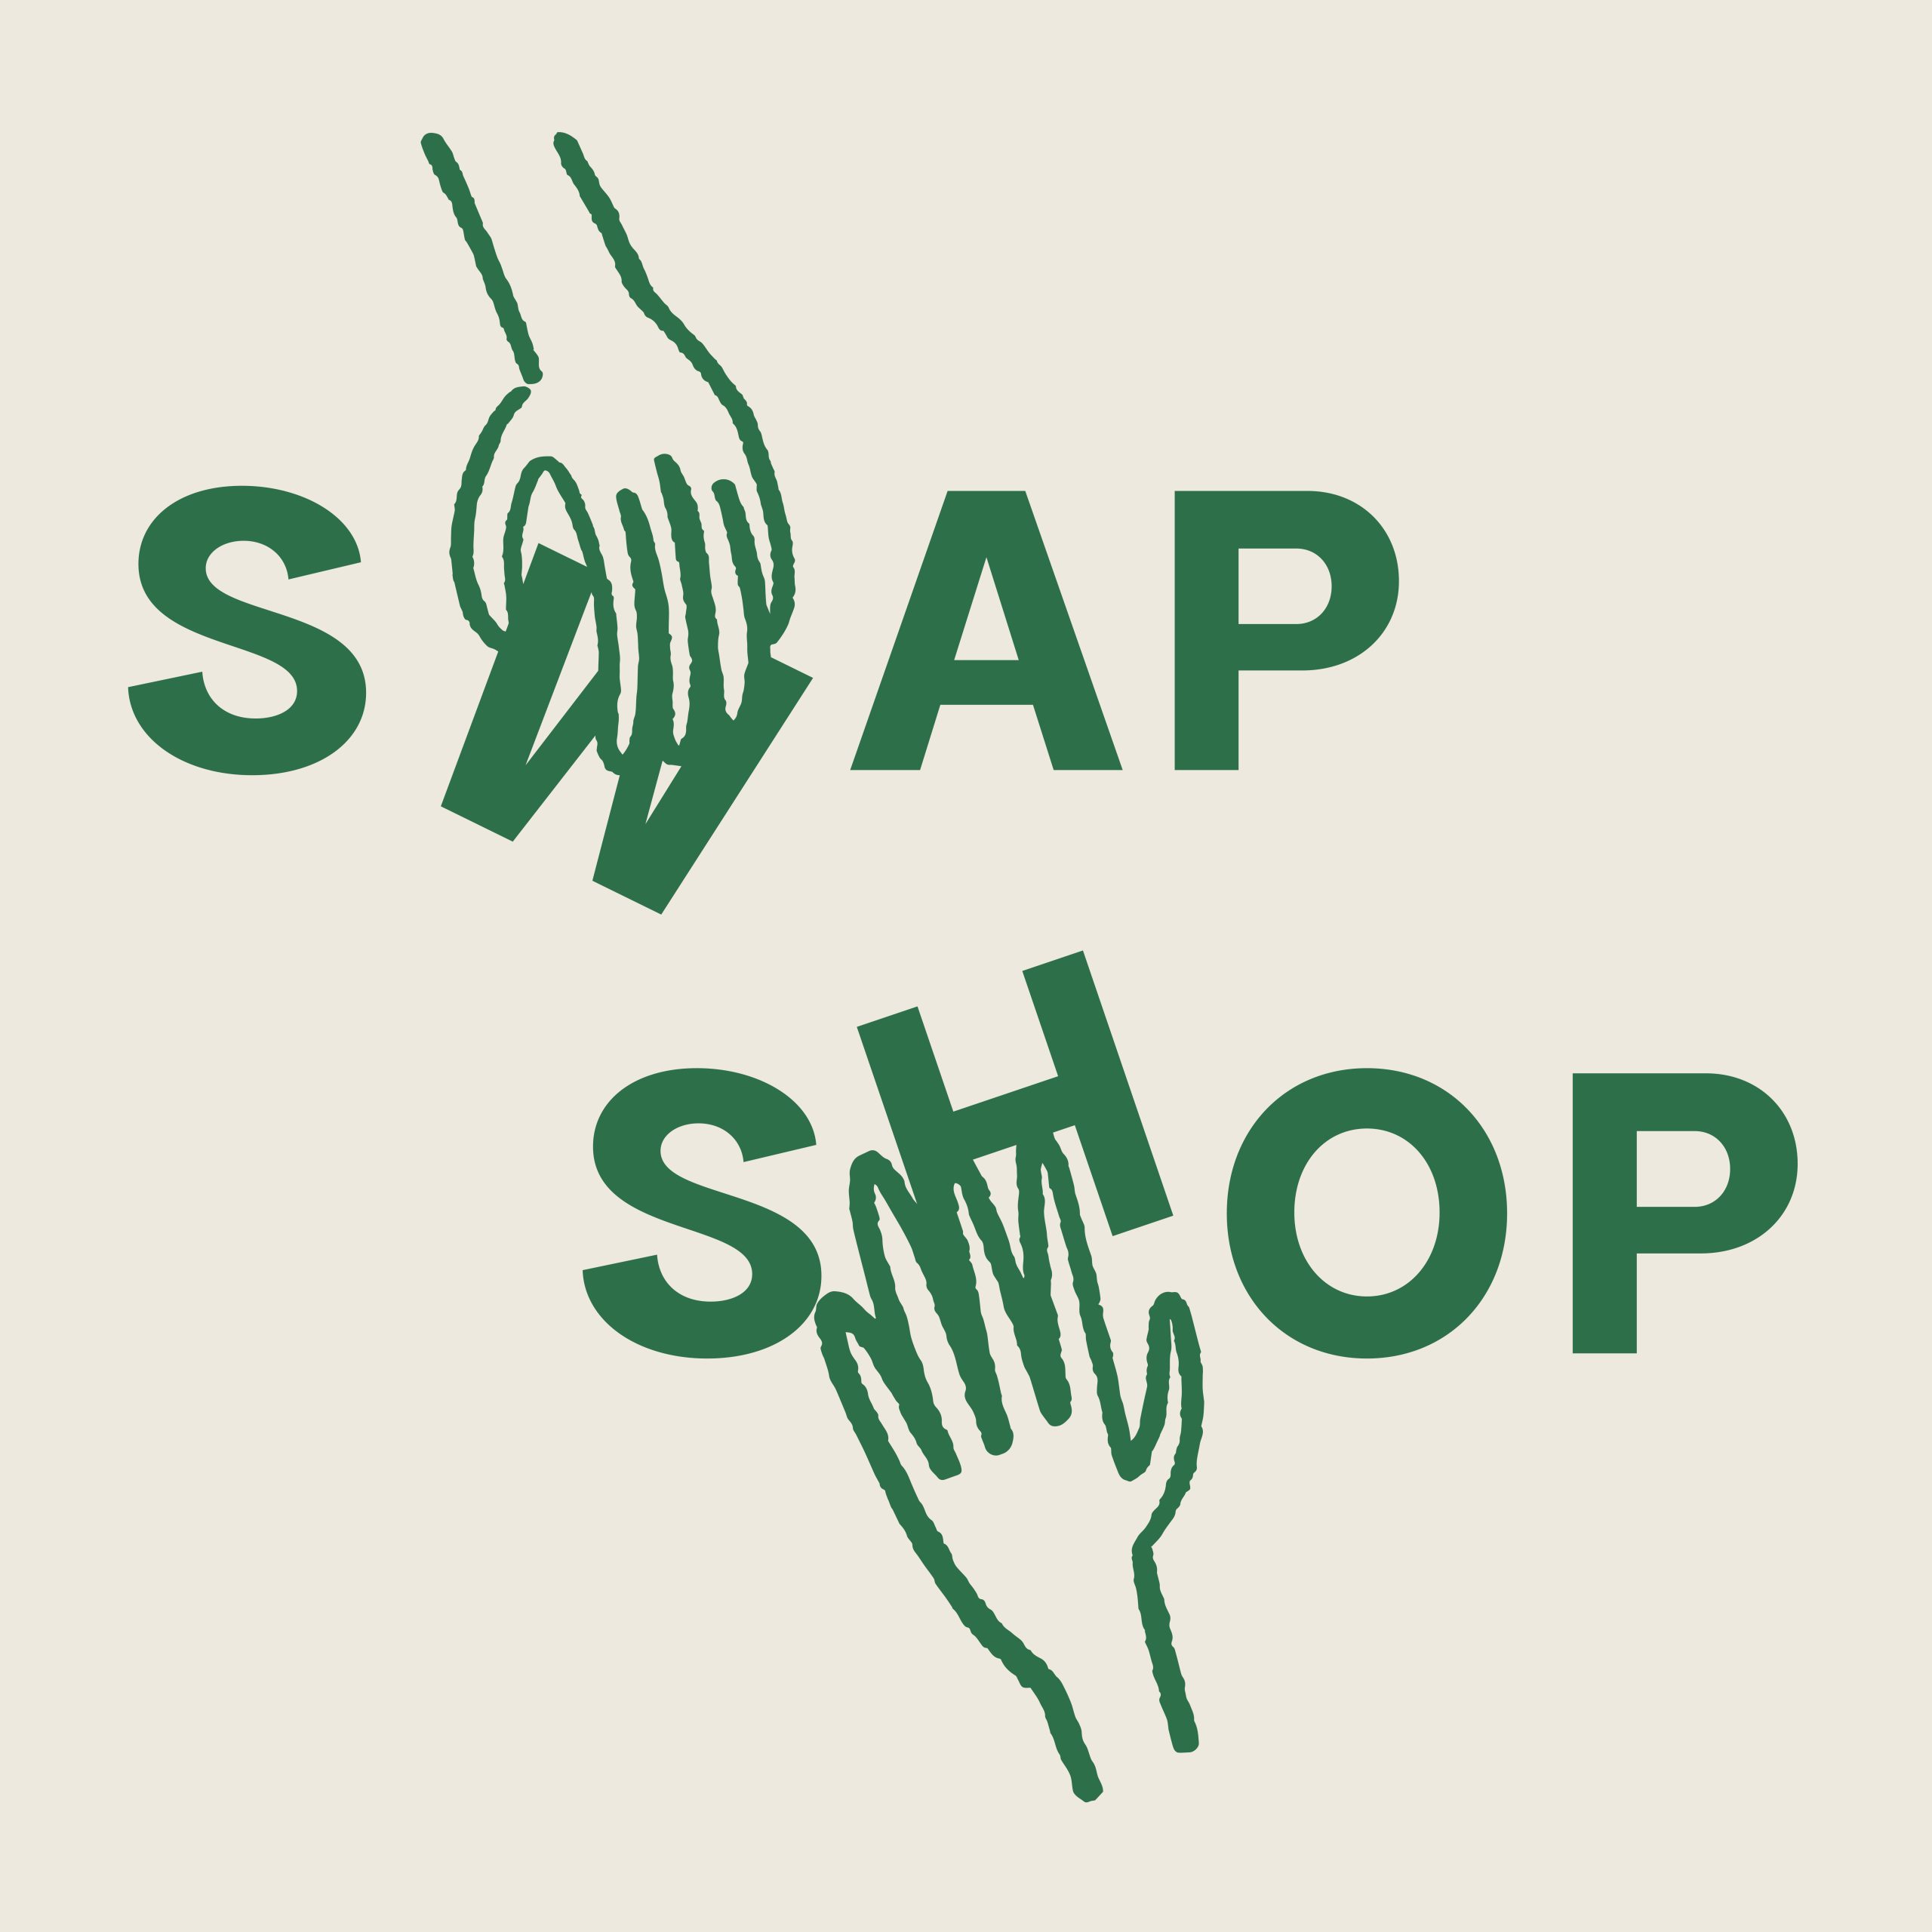 swap shop logo with illustrated hands grabbing the letters 'w' and 'h'